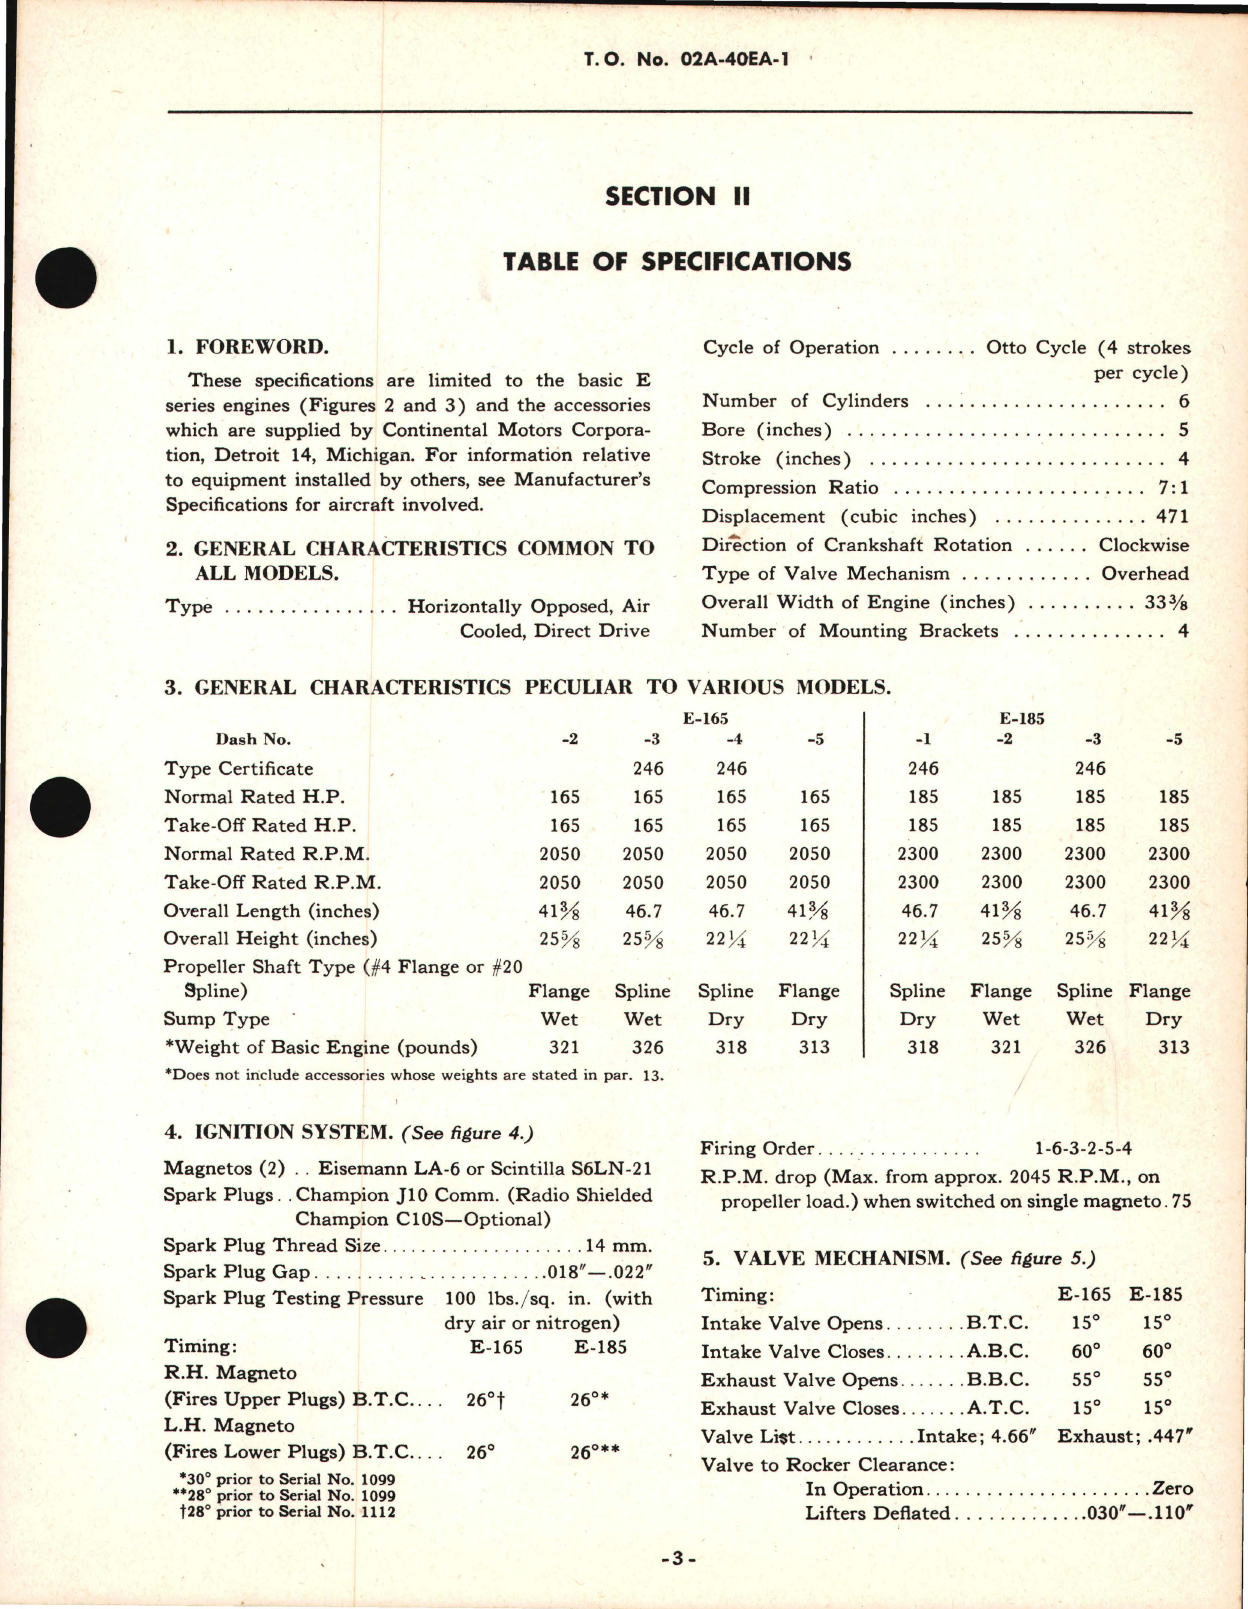 Sample page 9 from AirCorps Library document: Handbook of Instructions with Parts Catalog for O-470-7 (E-185) Engine